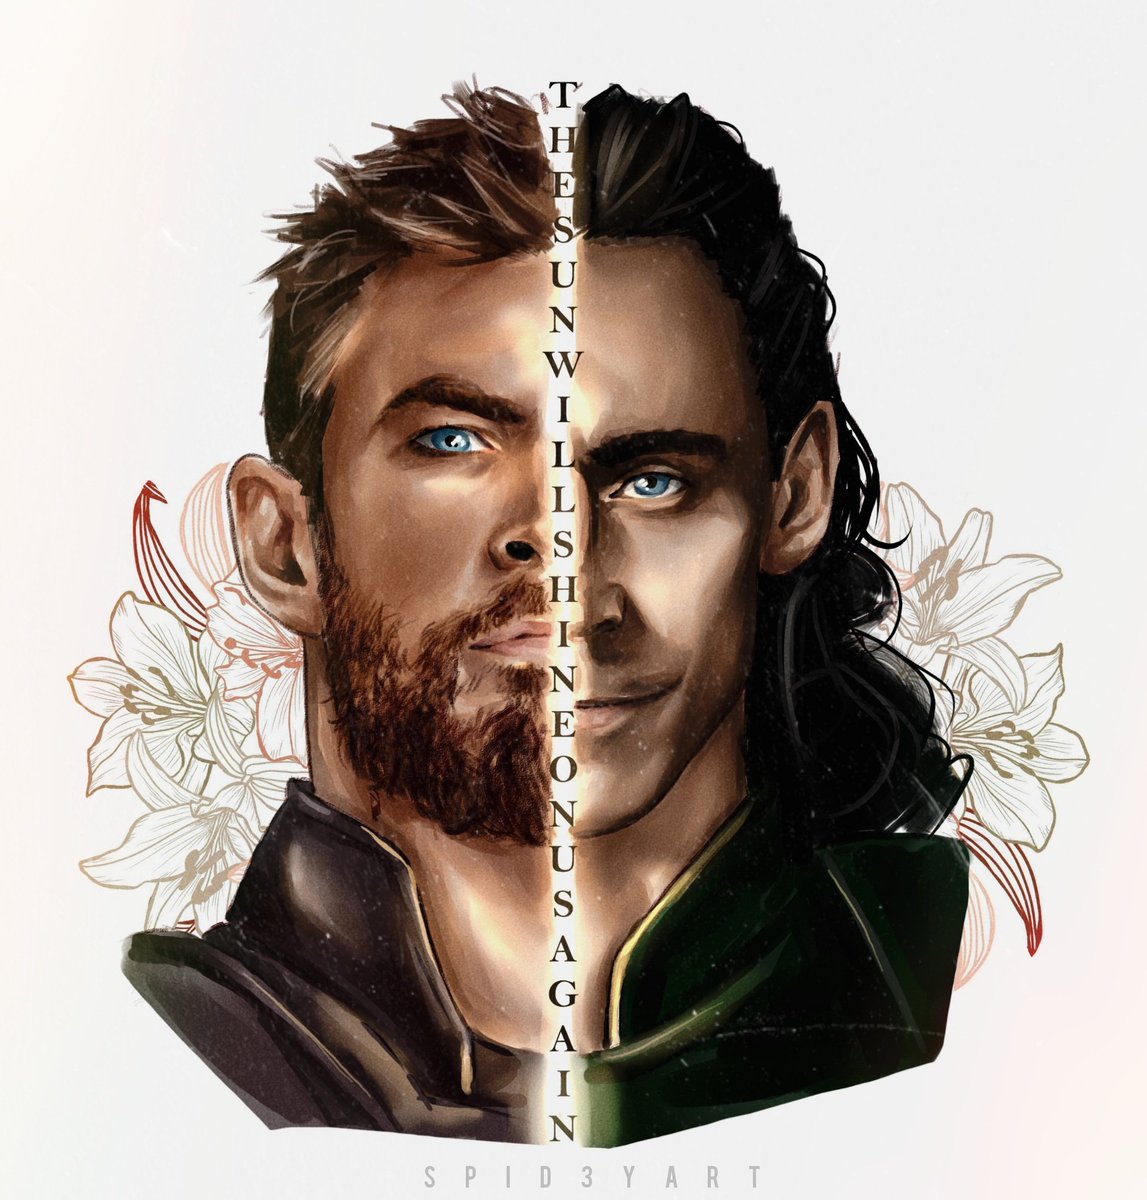 RT @ASGARDTRICKS: i'm back from hiatus and an emotional drawing it's the best way to announce it 
#THOR #LOKI https://t.co/NT6Z4a5Diw